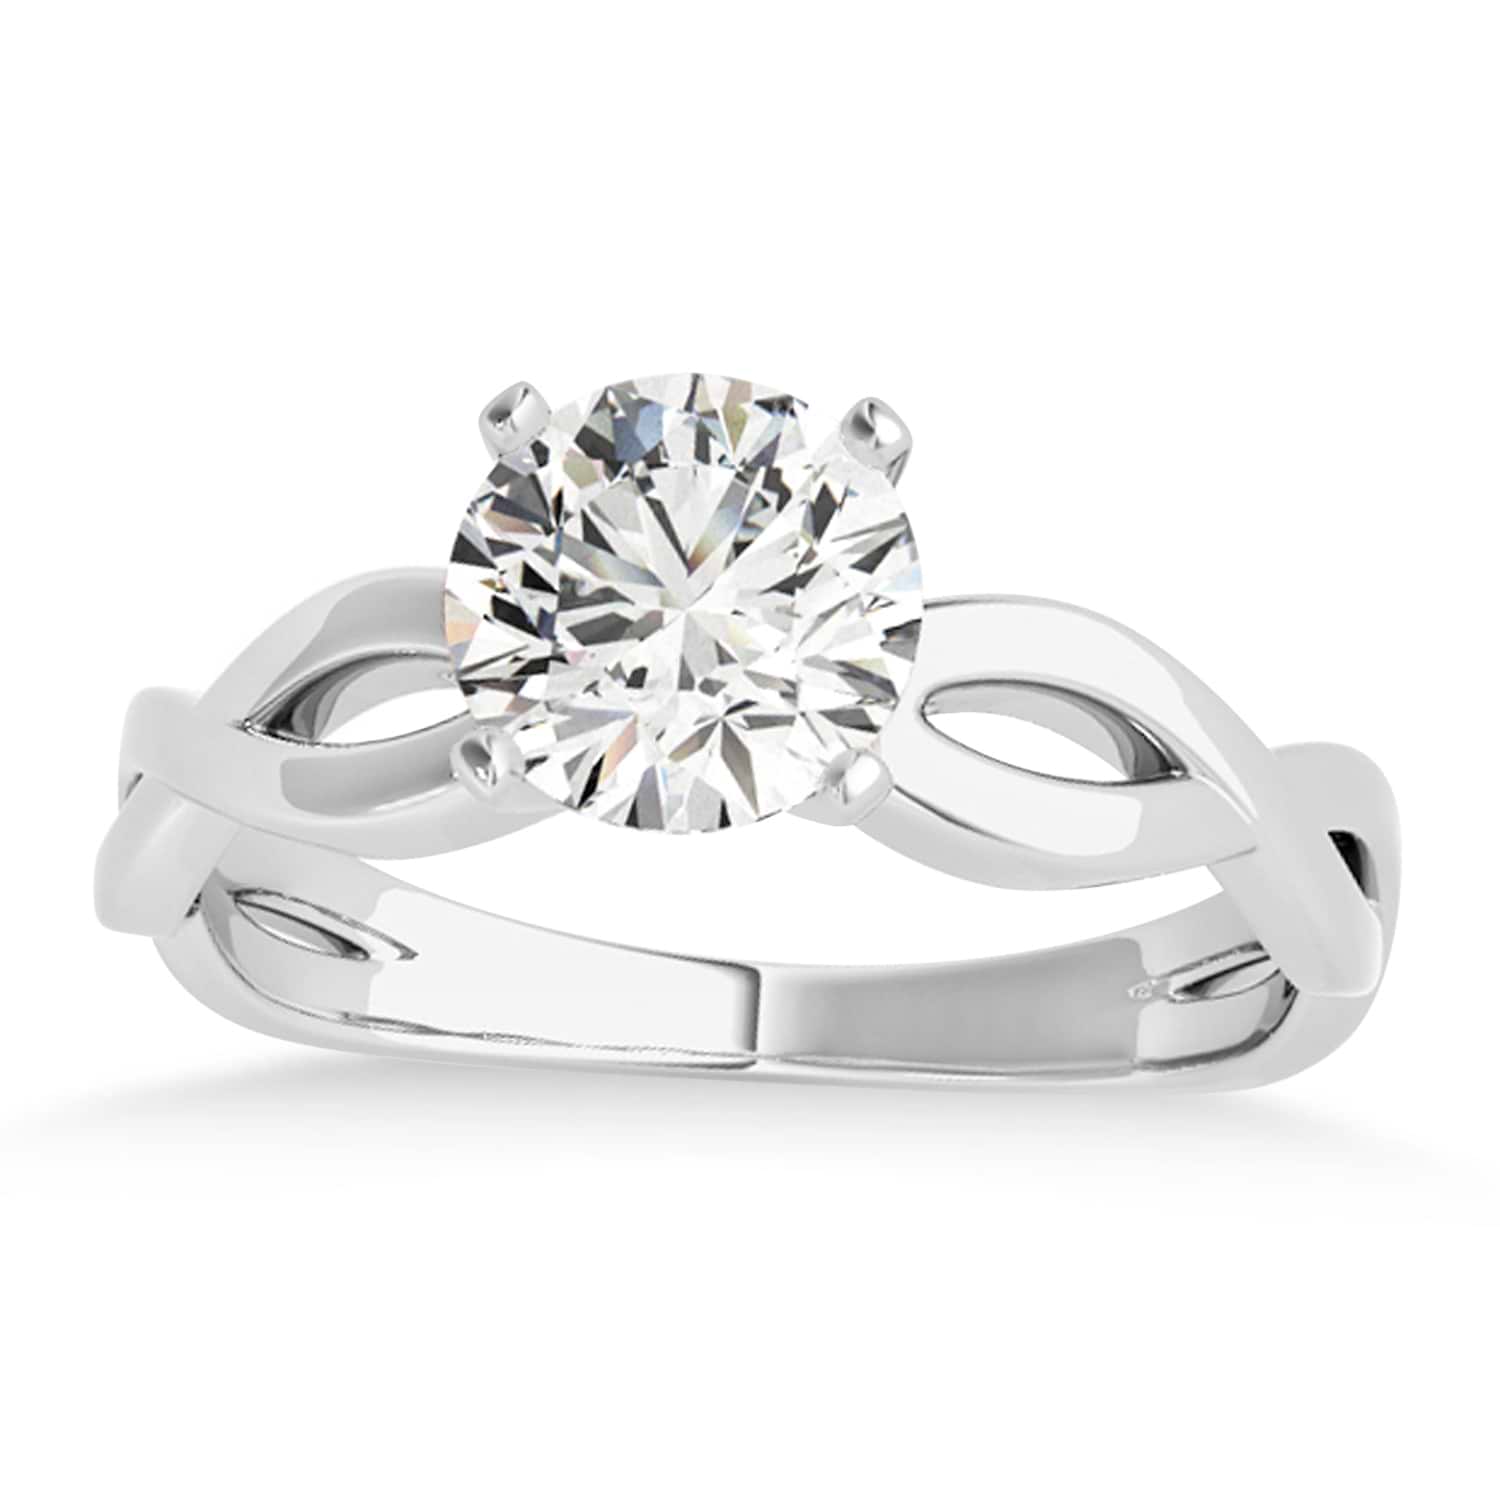 Diamond Twisted Shank Engagement Ring in Platinum